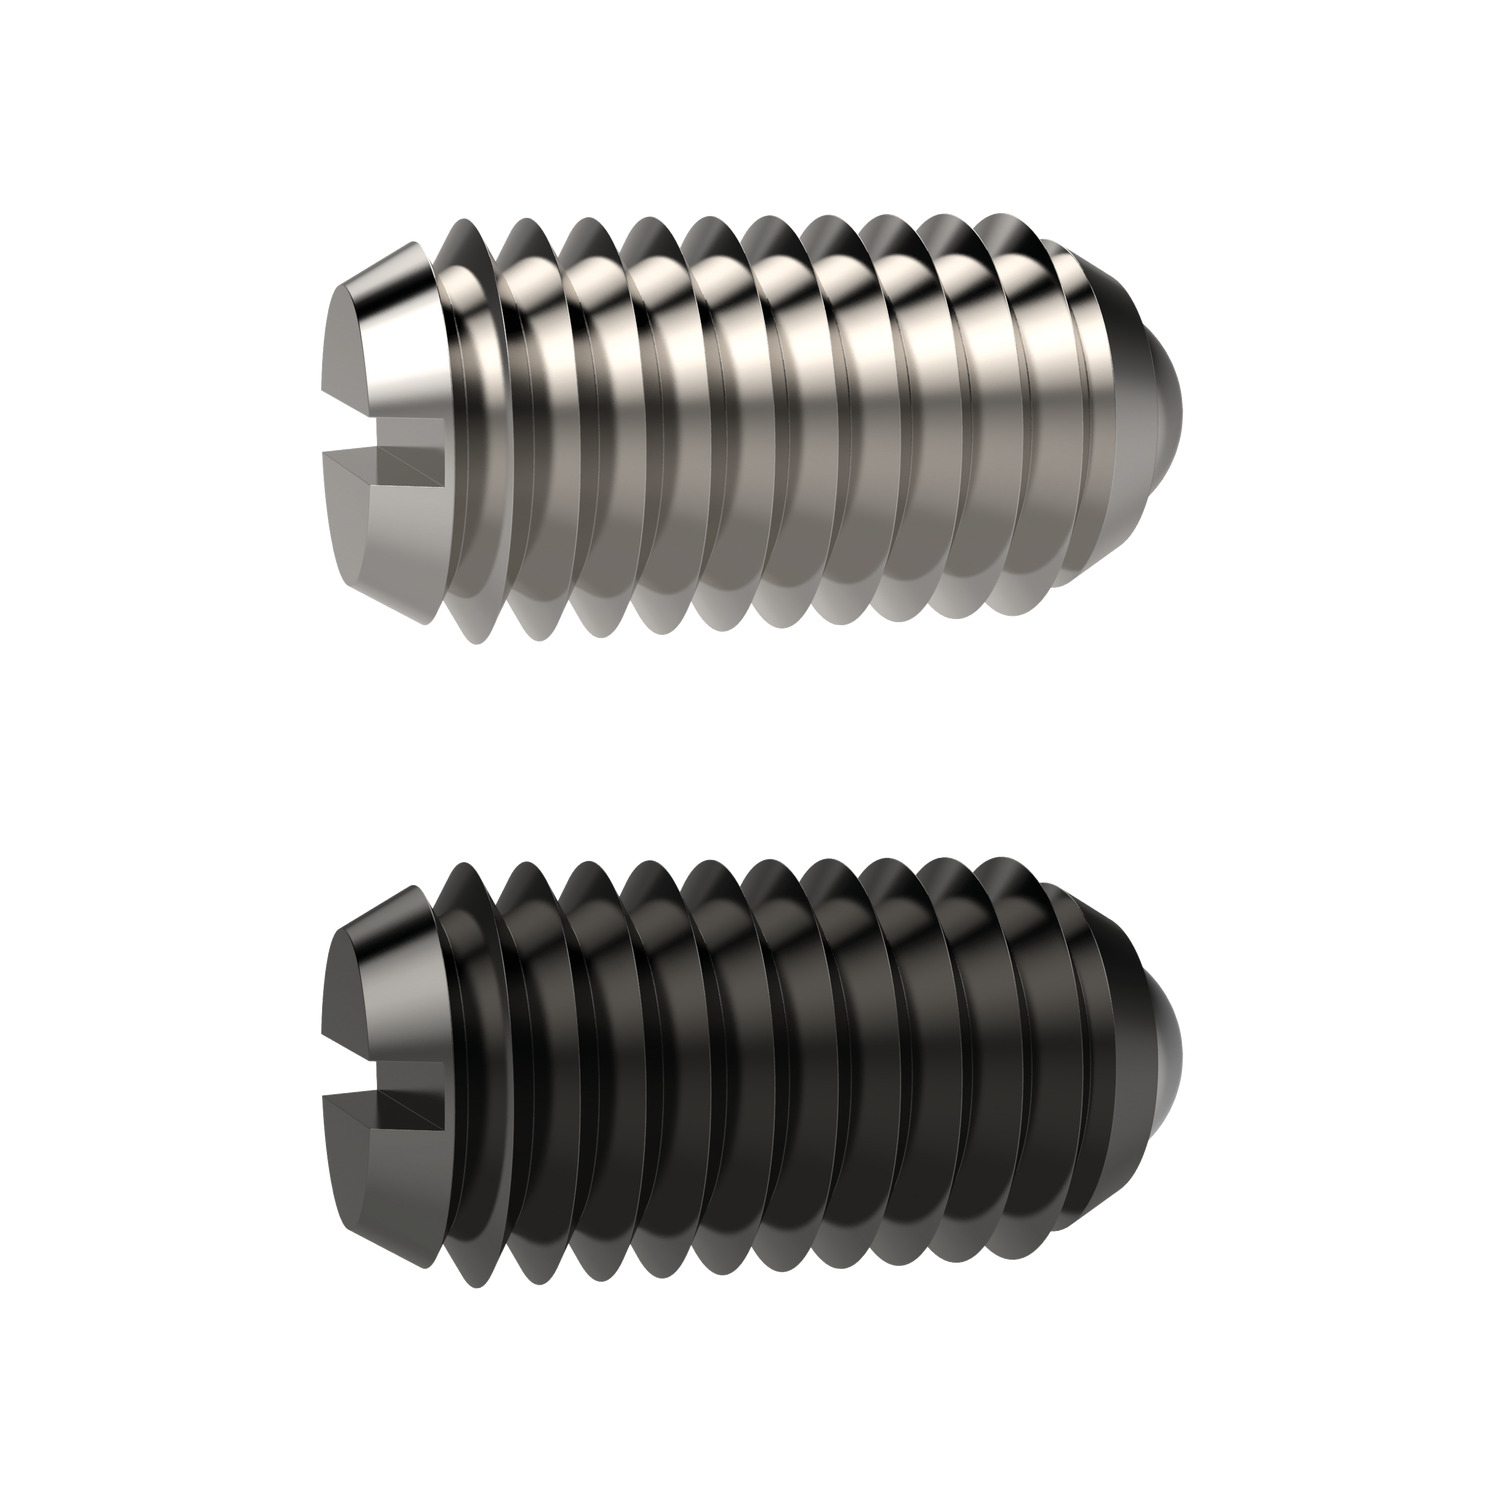 Spring Plungers A ball end and slot spring plunger available in steel and stainless steel with sizes starting from M2 upto M24. Increased spring strength variations provided within the standard range.